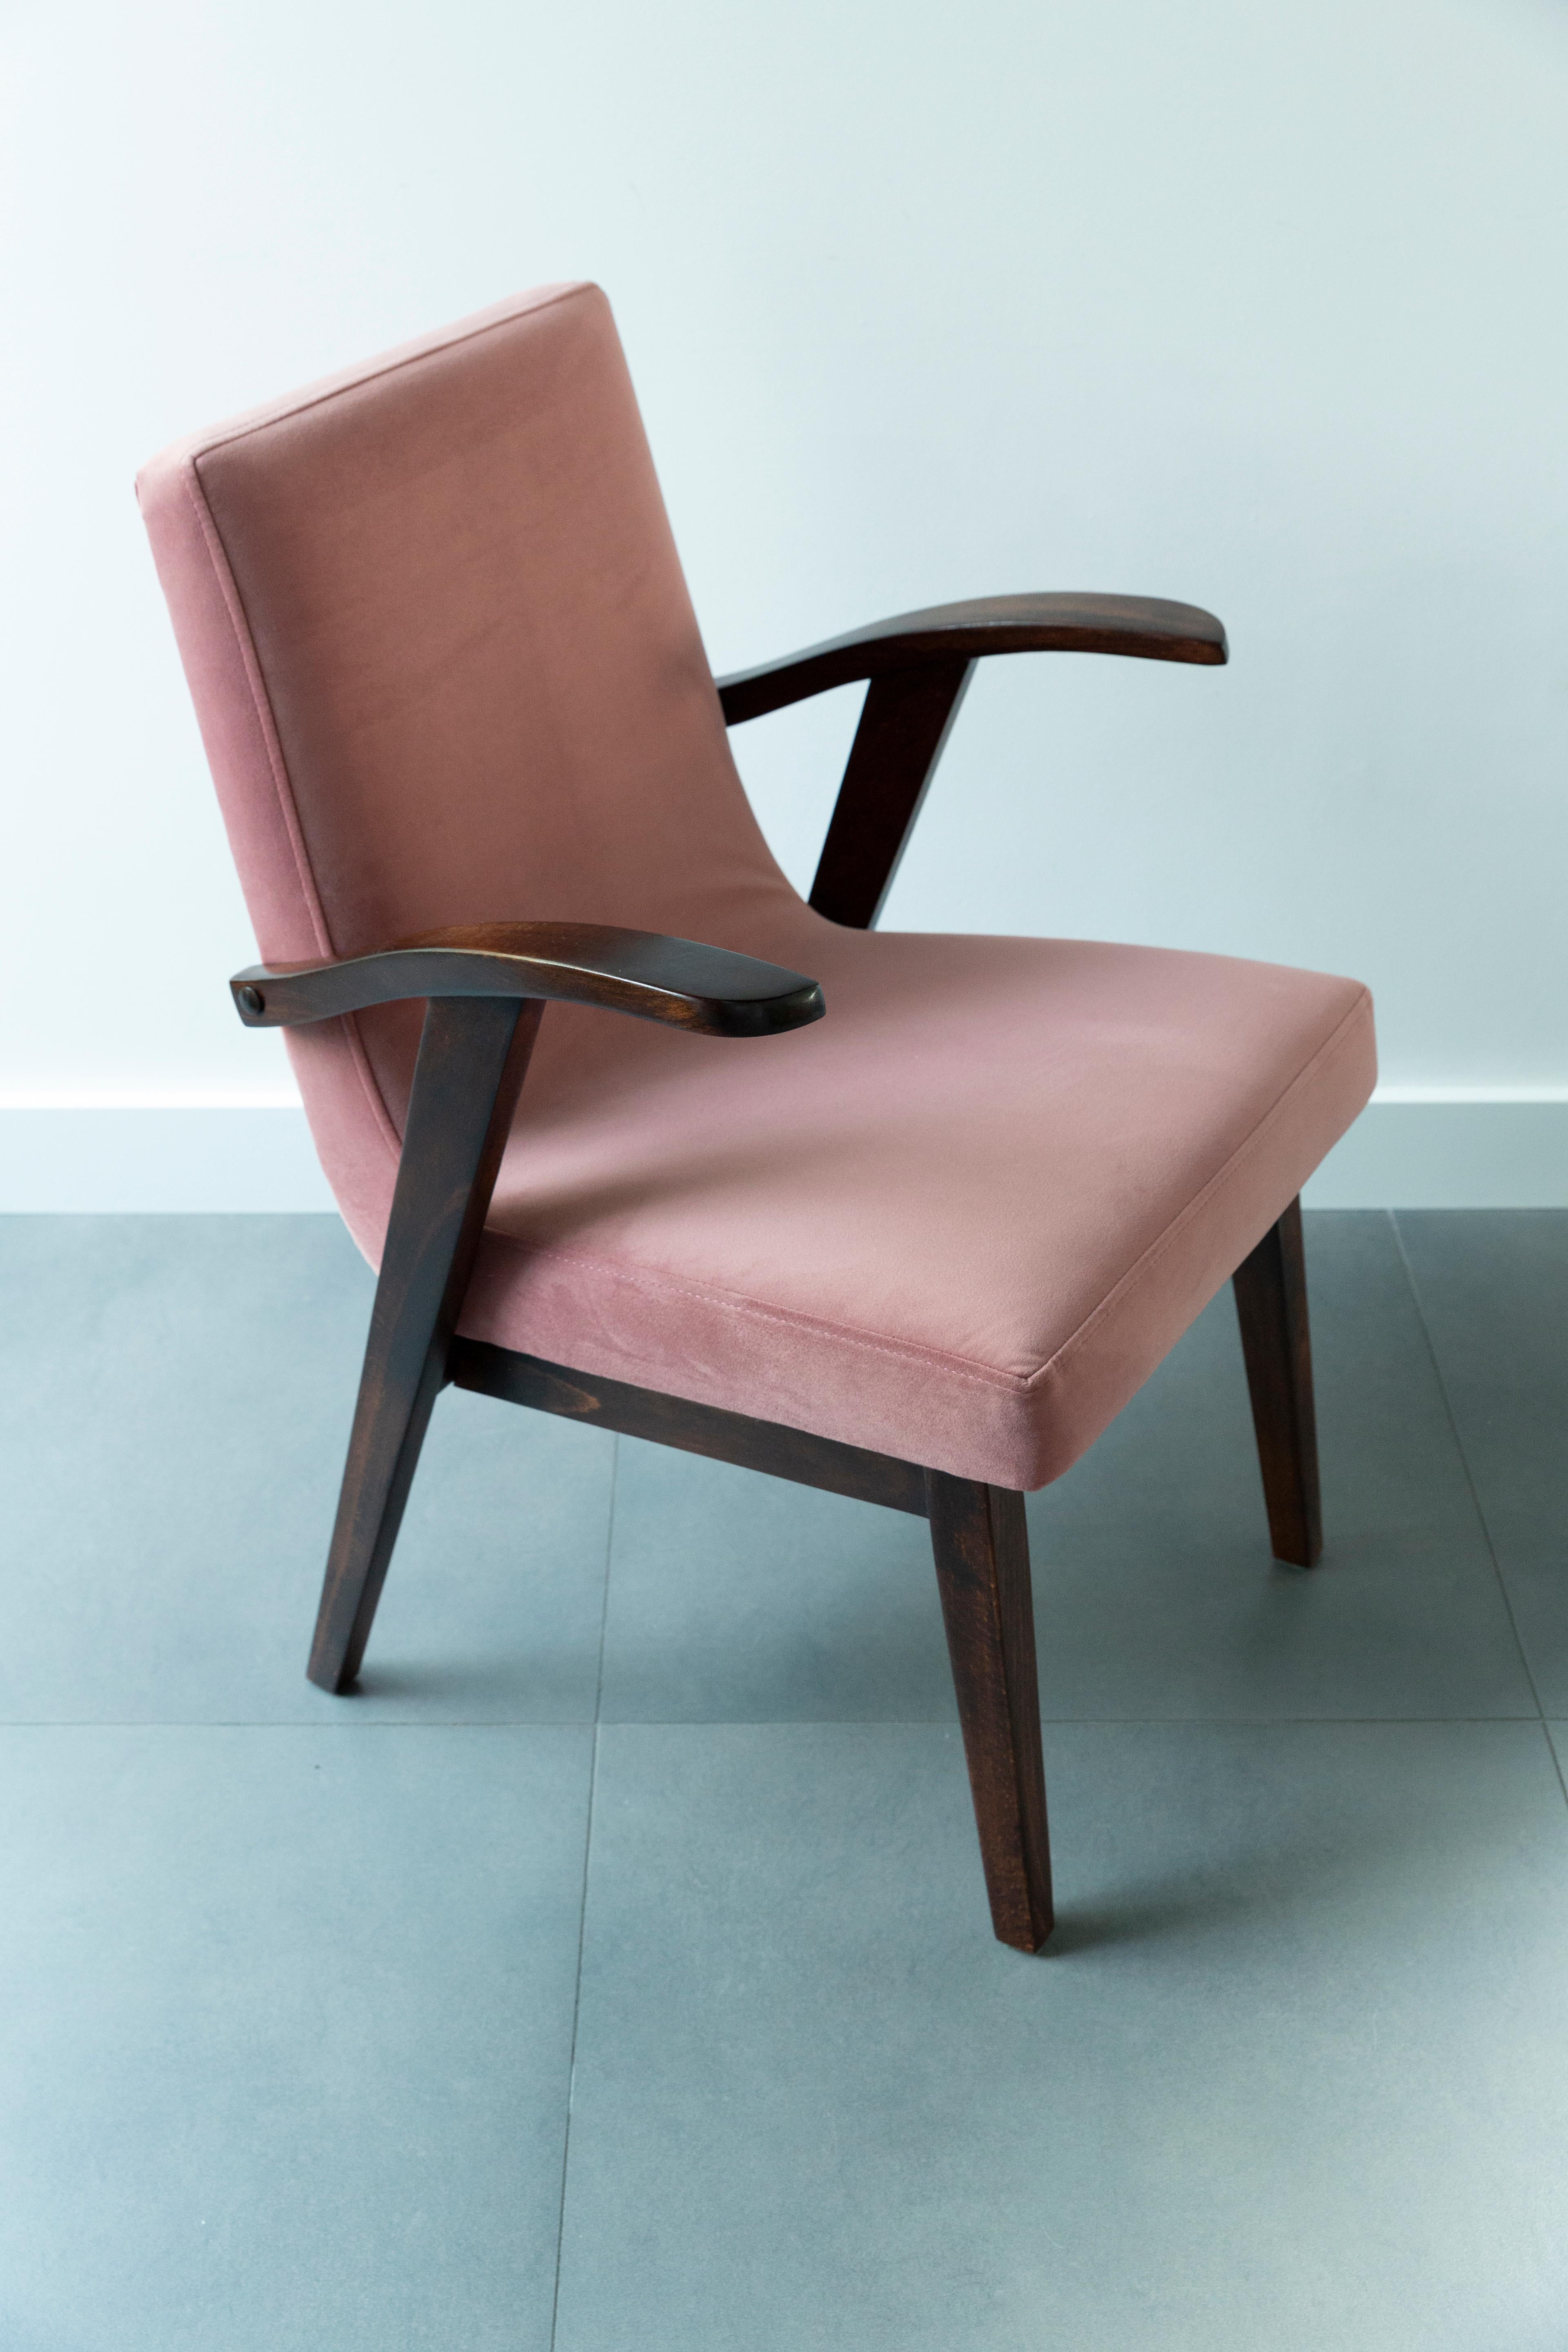 Mid-Century Modern 20th Century Vintage Armchair in Dusty Pink Velvet by Mieczyslaw Puchala, 1960s For Sale